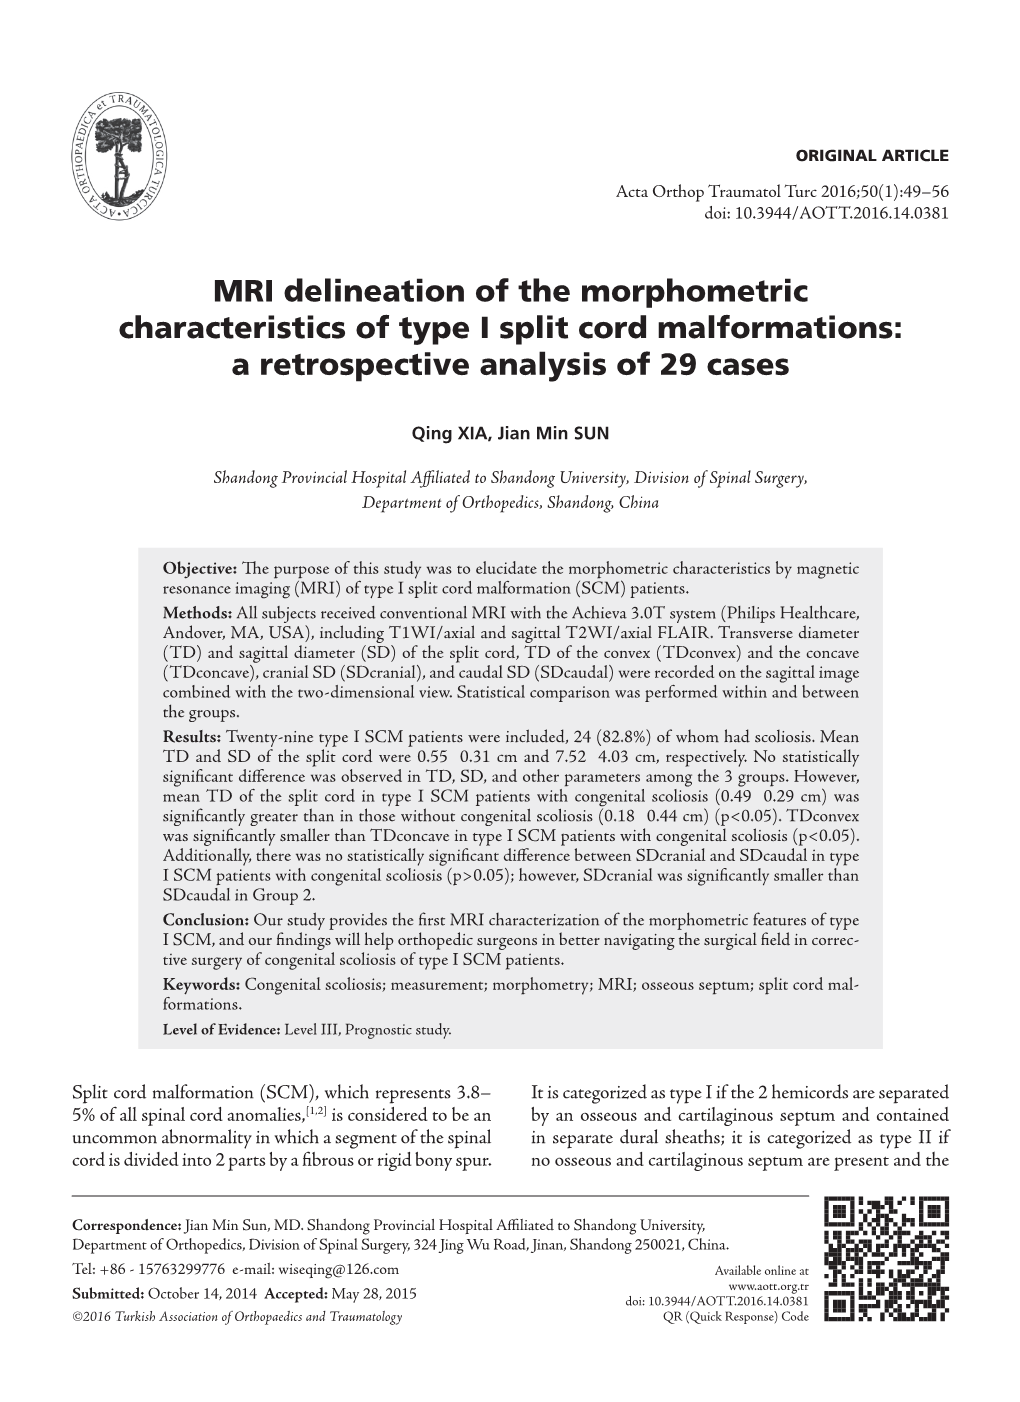 MRI Delineation of the Morphometric Characteristics of Type I Split Cord Malformations: a Retrospective Analysis of 29 Cases